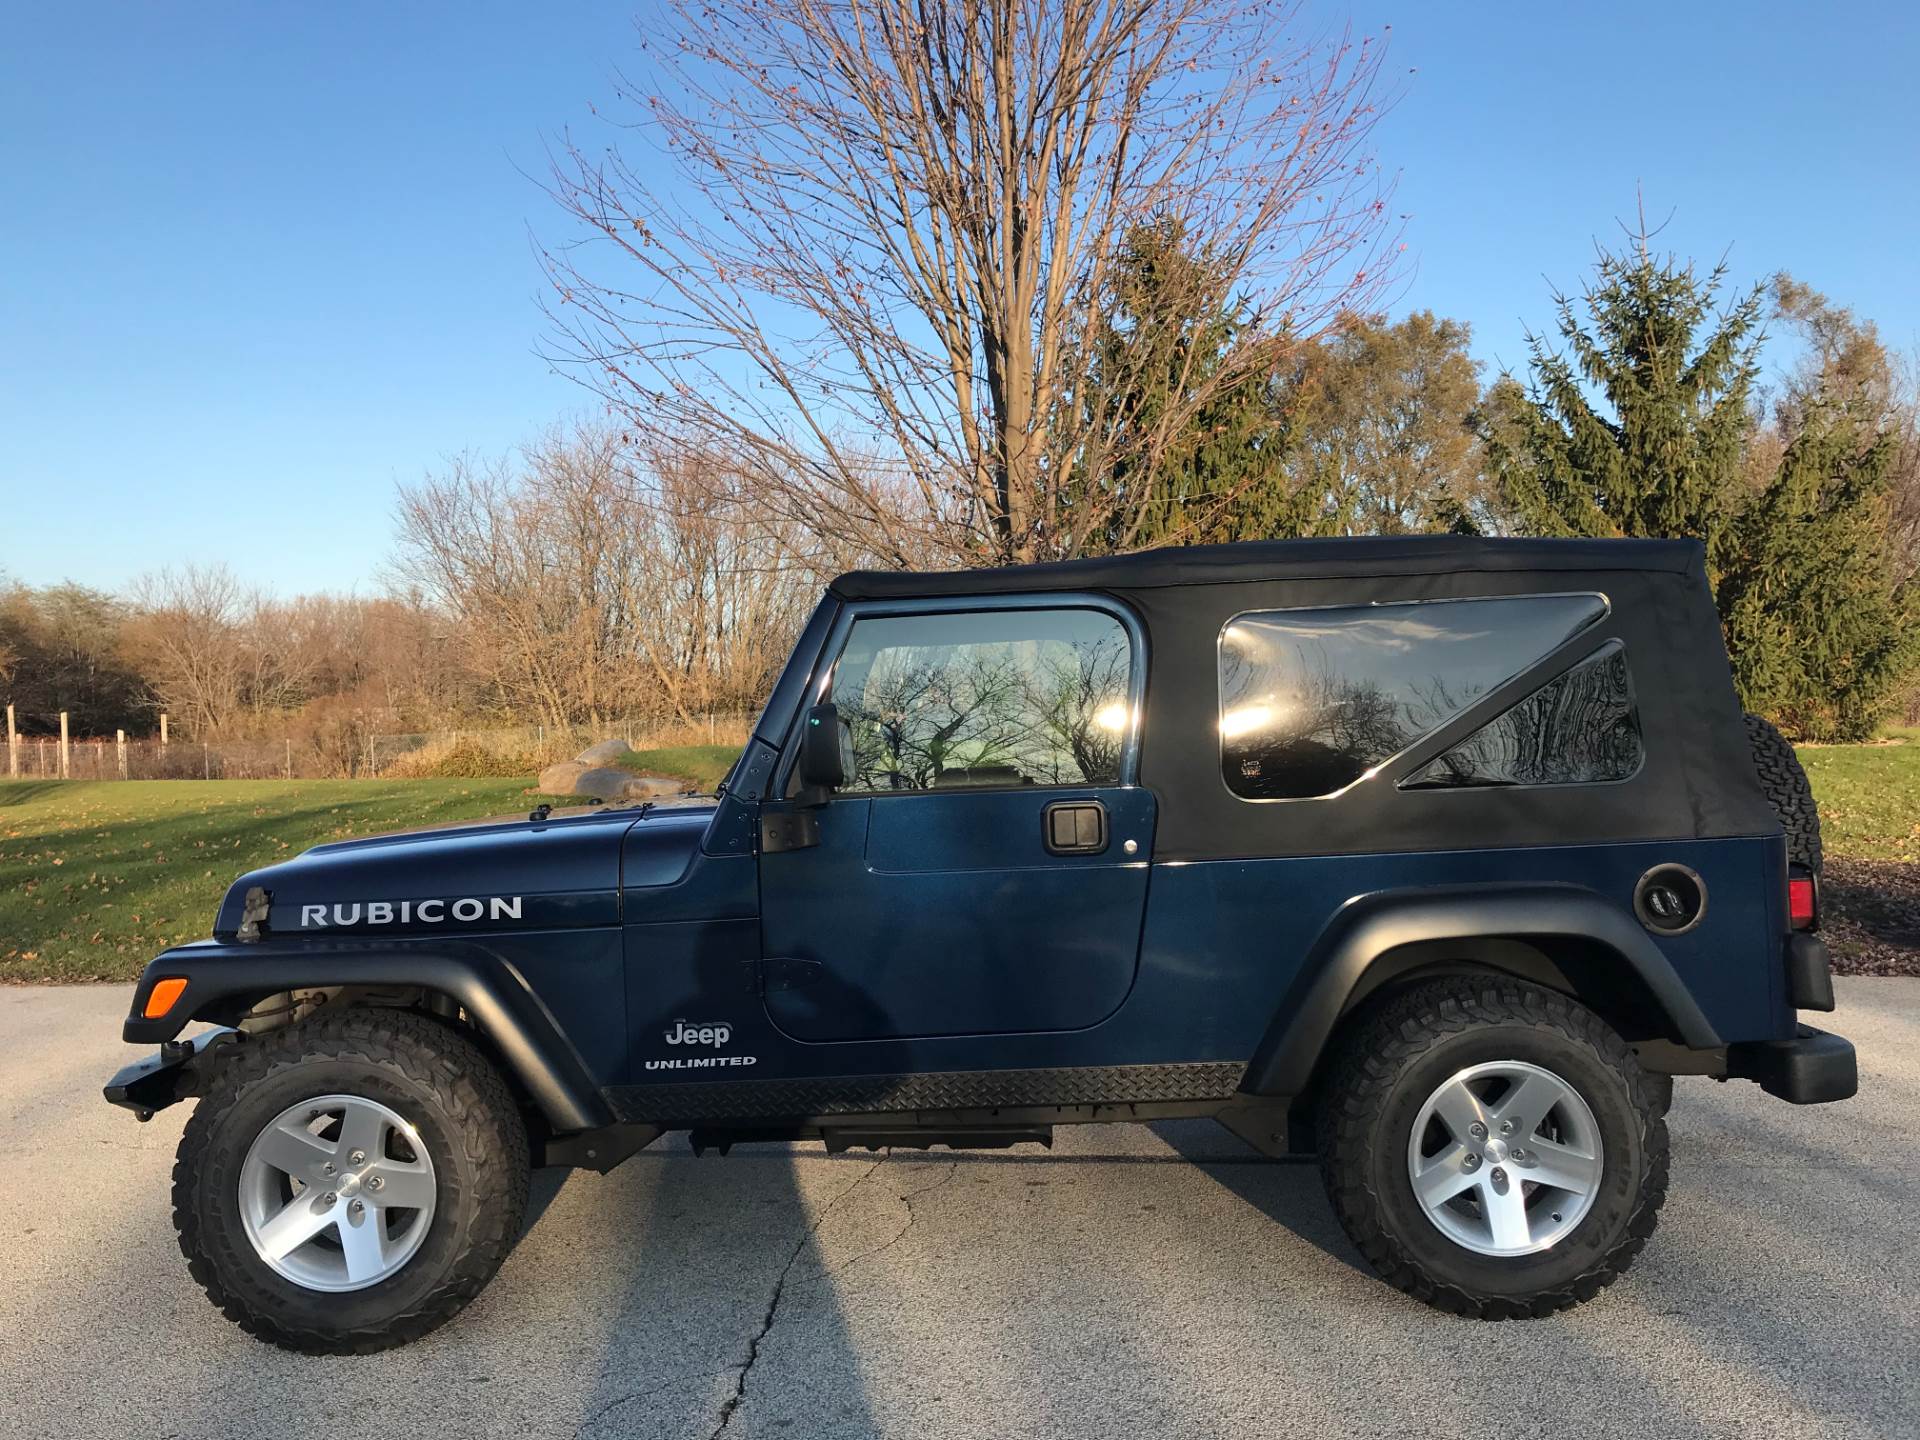 2006 Jeep Wrangler Unlimited Rubicon 2dr SUV 4WD in Big Bend, Wisconsin - Photo 101